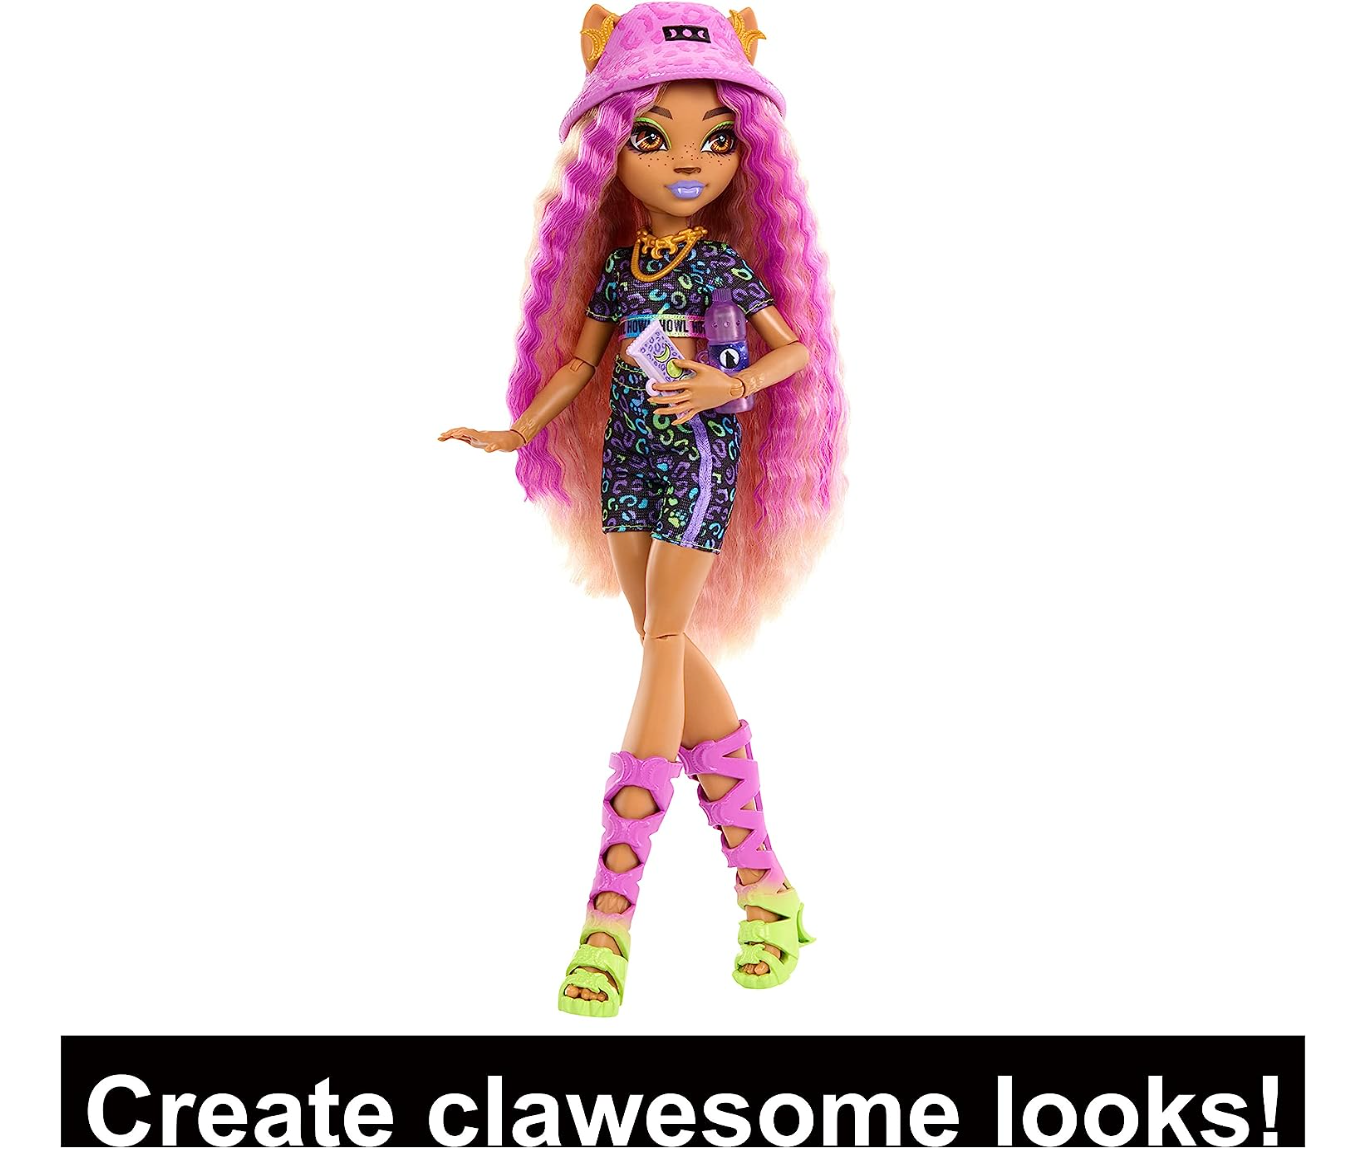 Monster High Doll and Fashion Set, Clawdeen Wolf with Dress-Up Locker and 19+ Surprises, Skulltimate Secrets